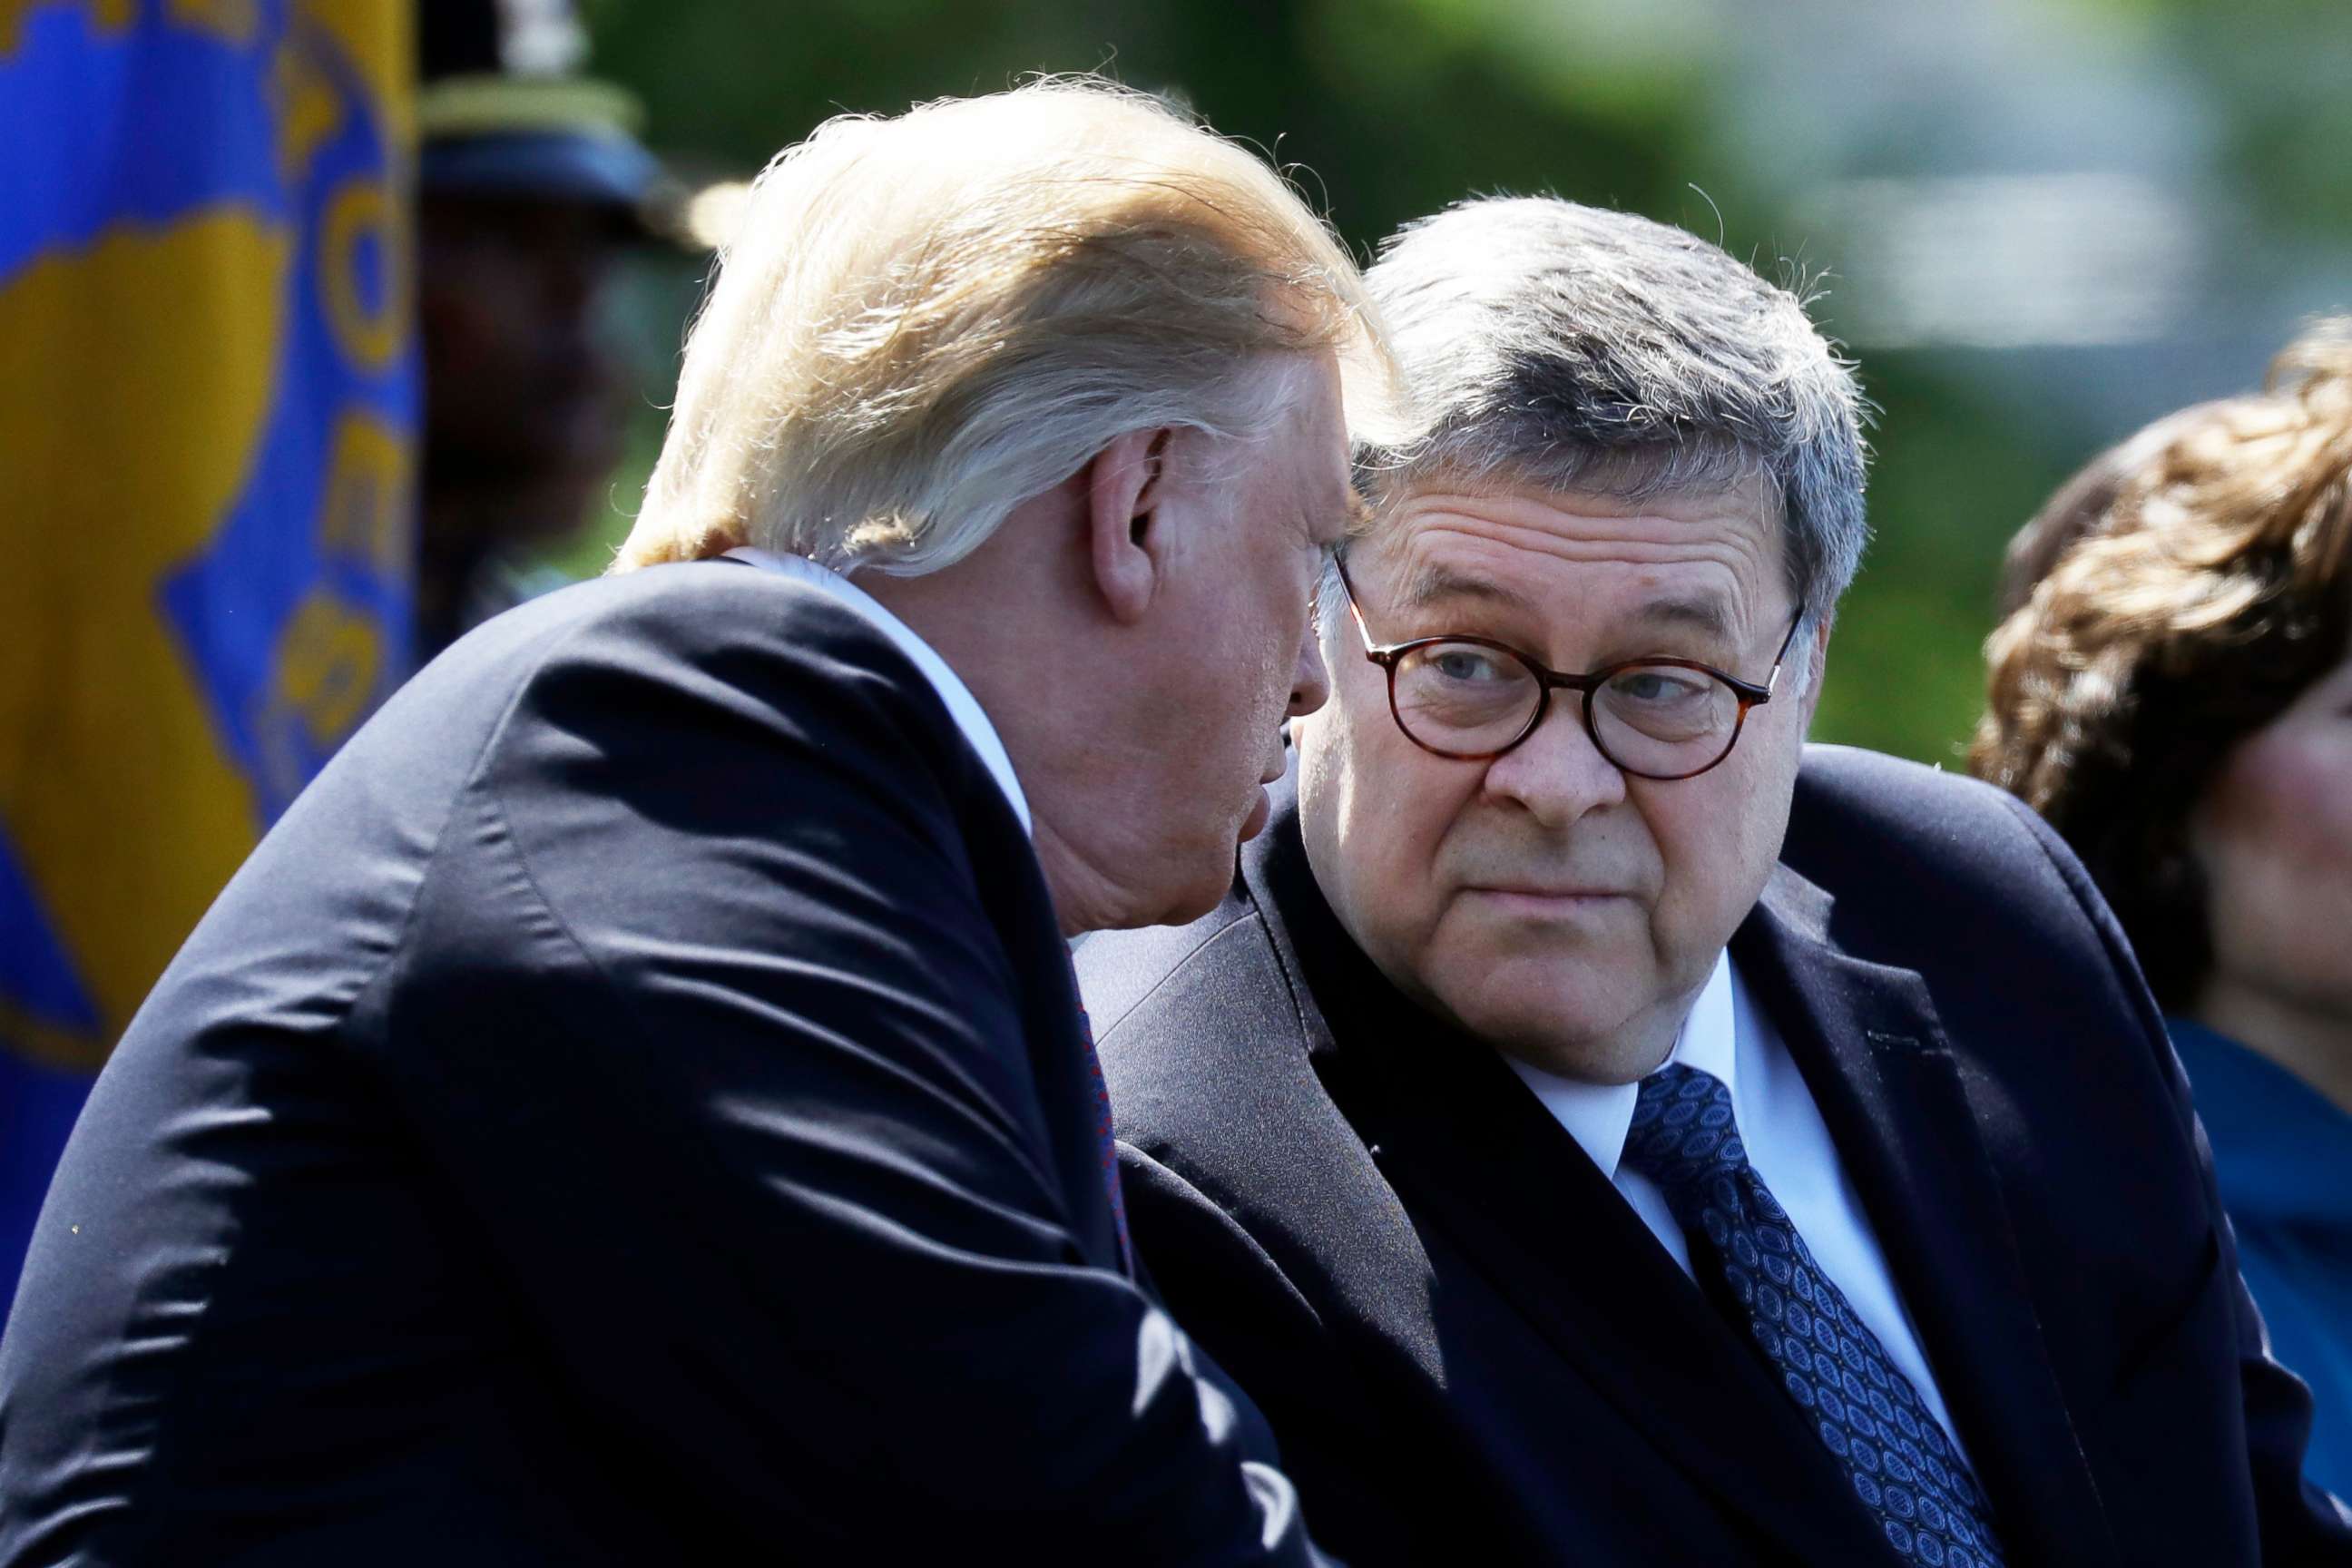 PHOTO: In this May 15, 2019 file photo, President Donald Trump and Attorney General William Barr attend the 38th Annual National Peace Officers' Memorial Service at the U.S. Capitol in Washington.